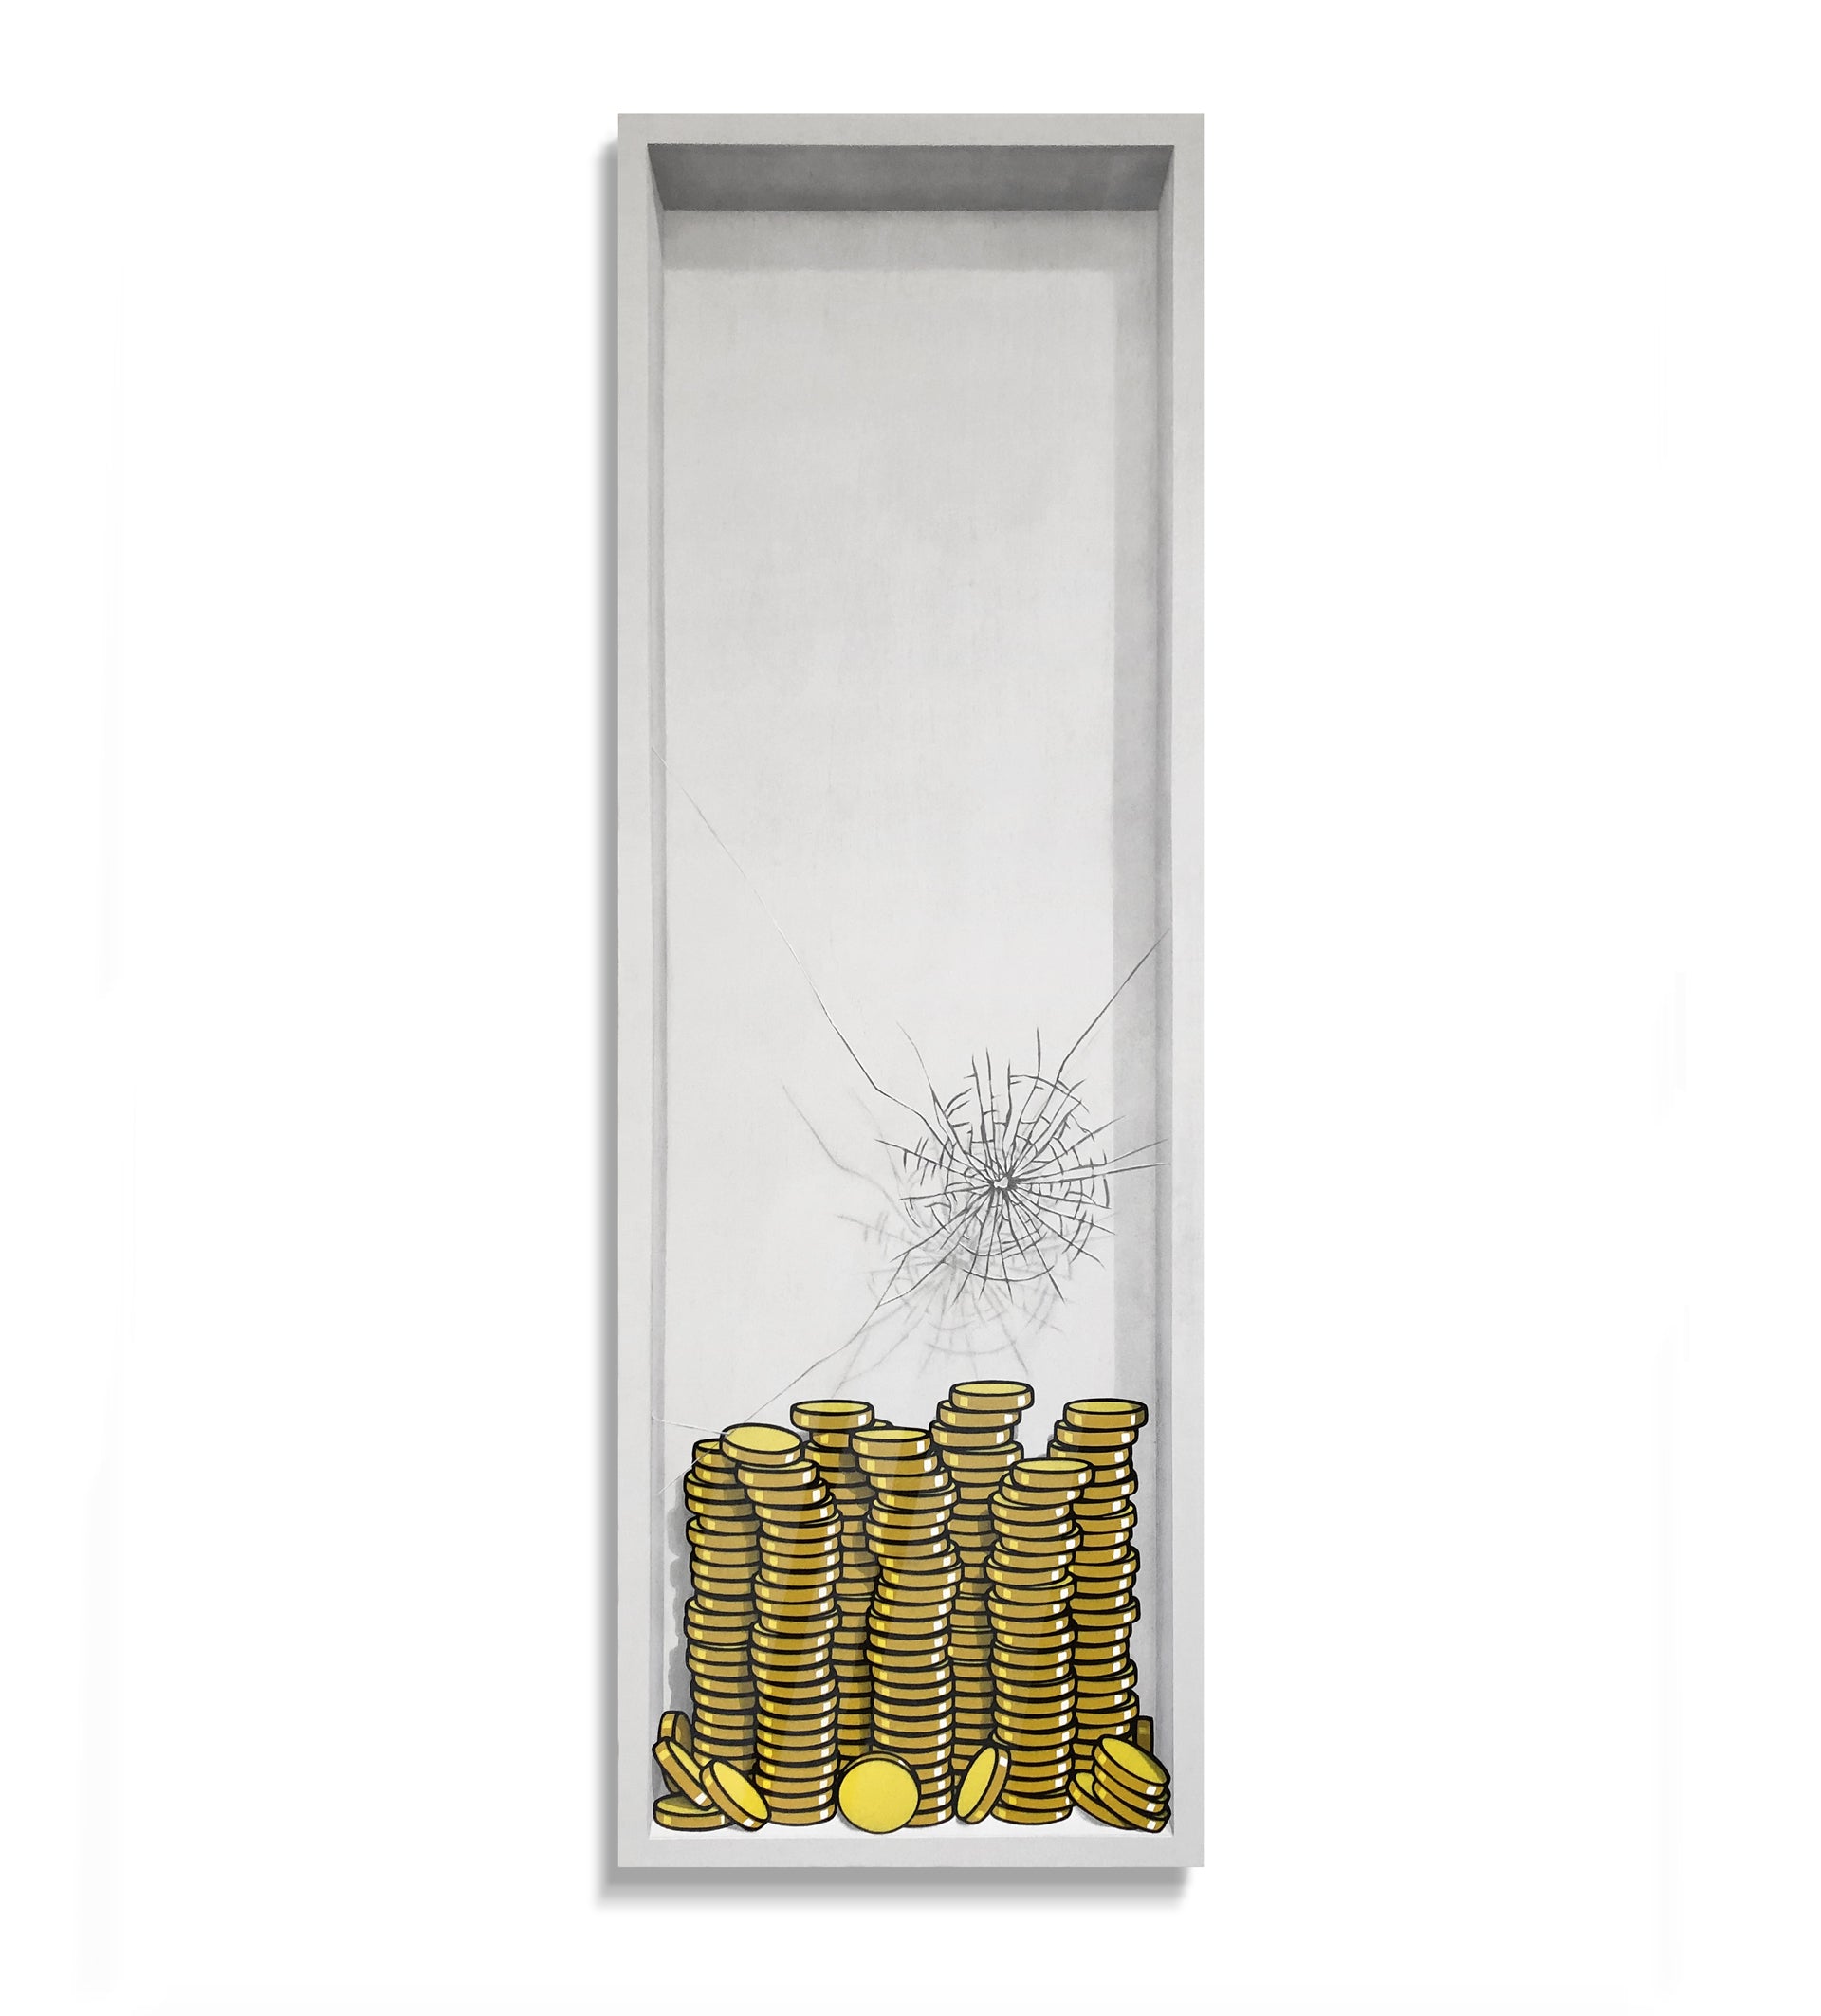 "175 Gold Coins ($10,500)" by E. Lee